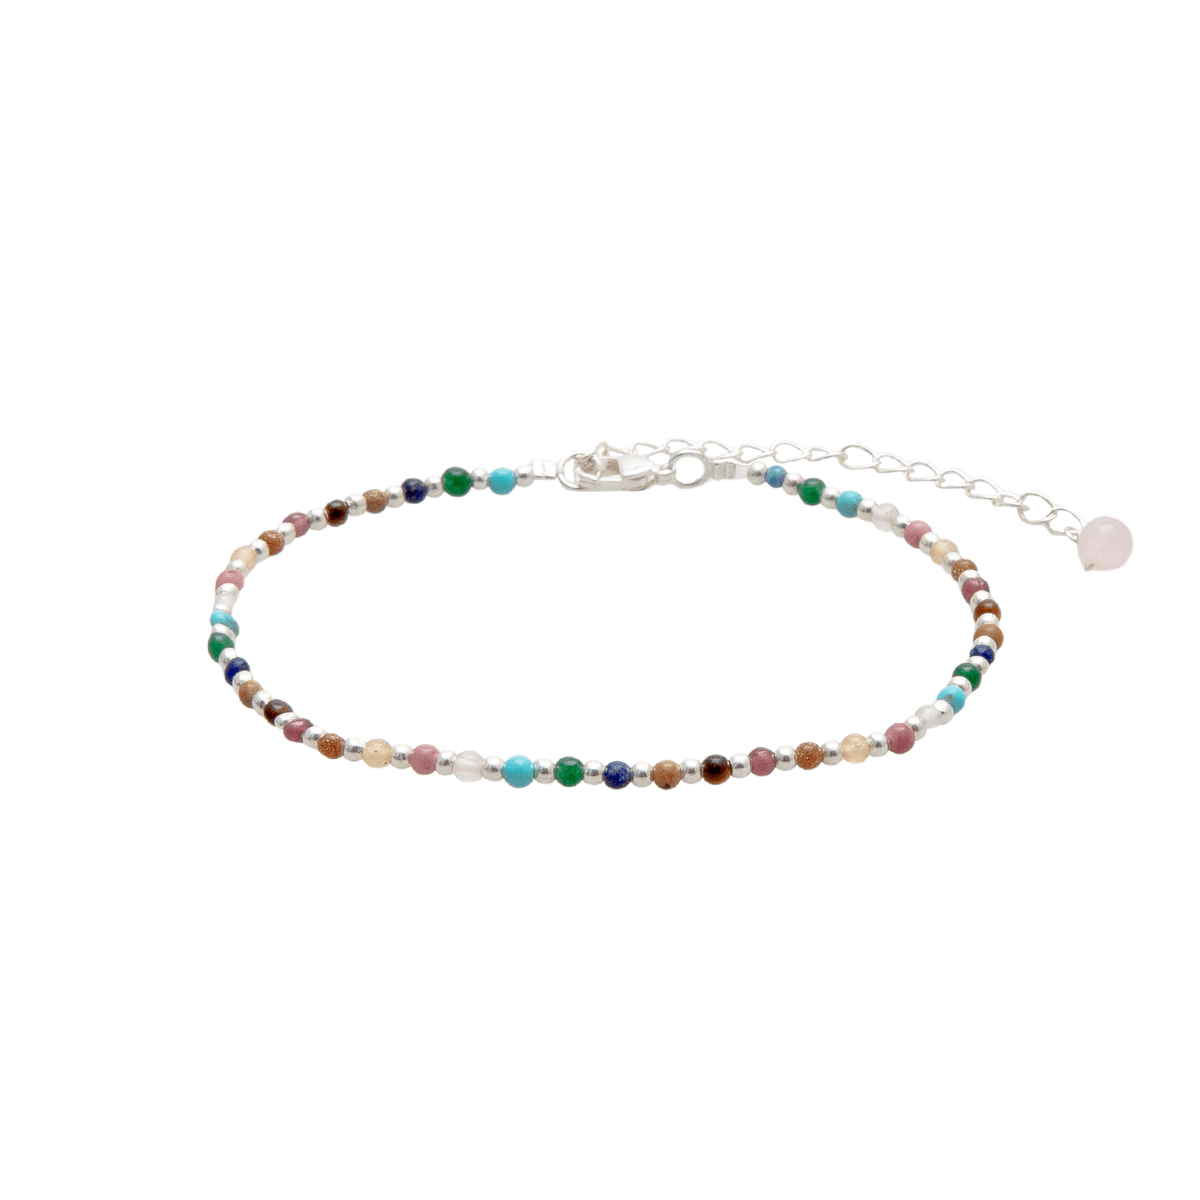 Dainty anklet with assorted multi-color stones and silver beads